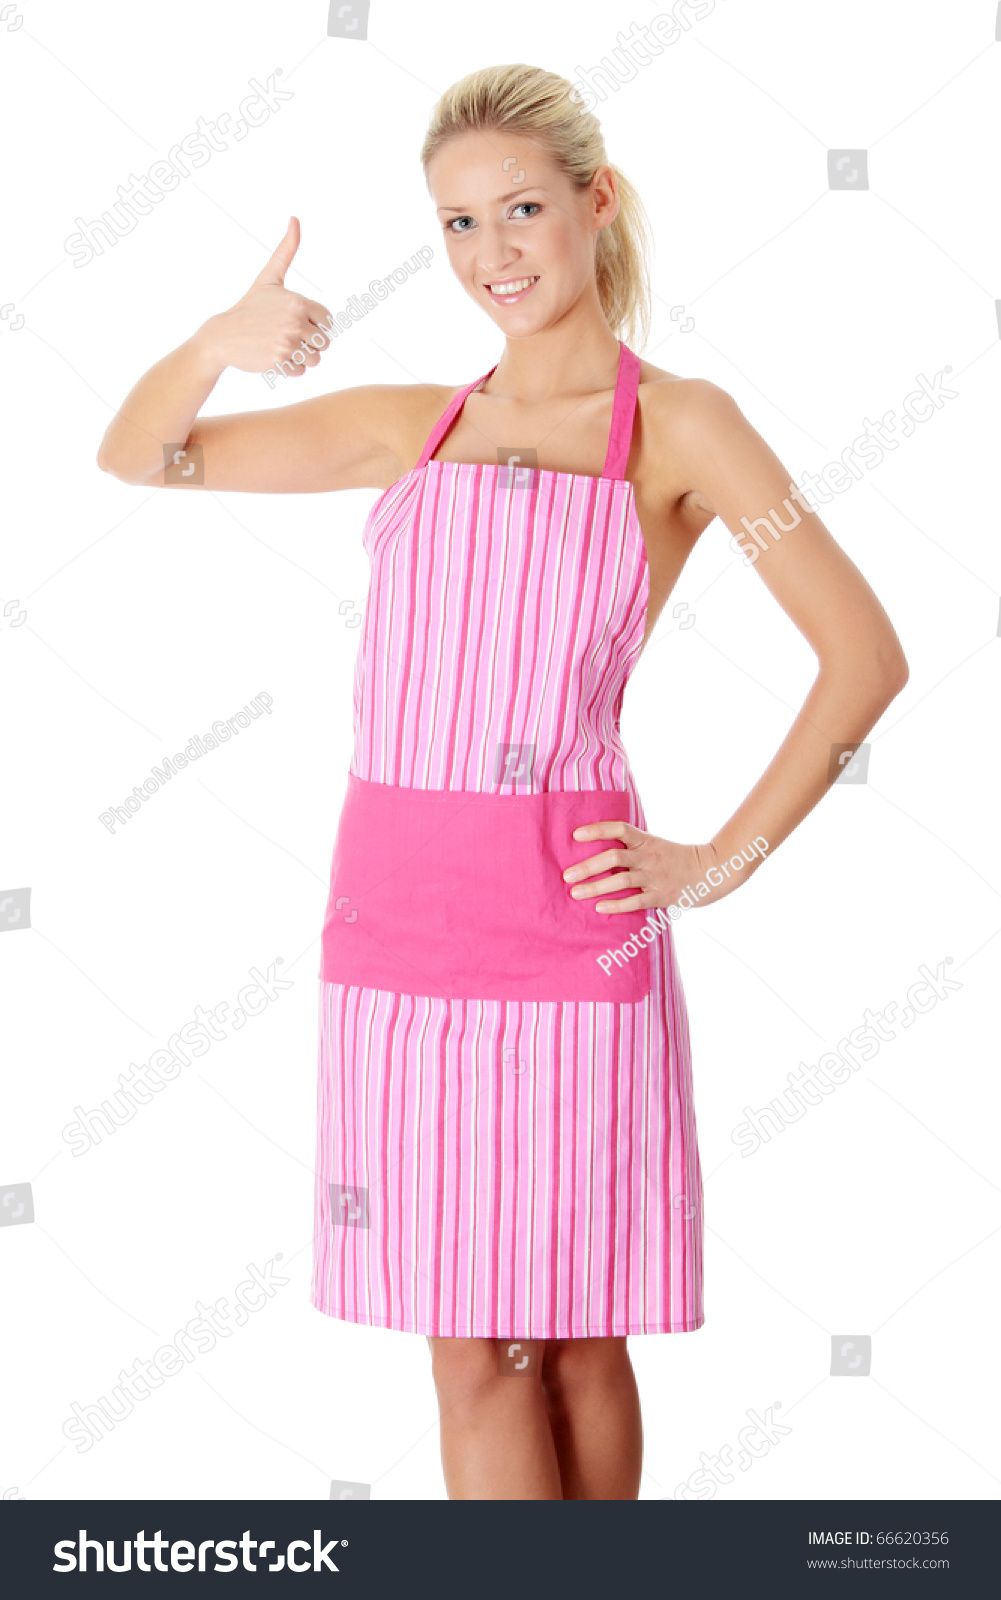 Happy Blond Nude Woman In Pink Apron Isolated On White